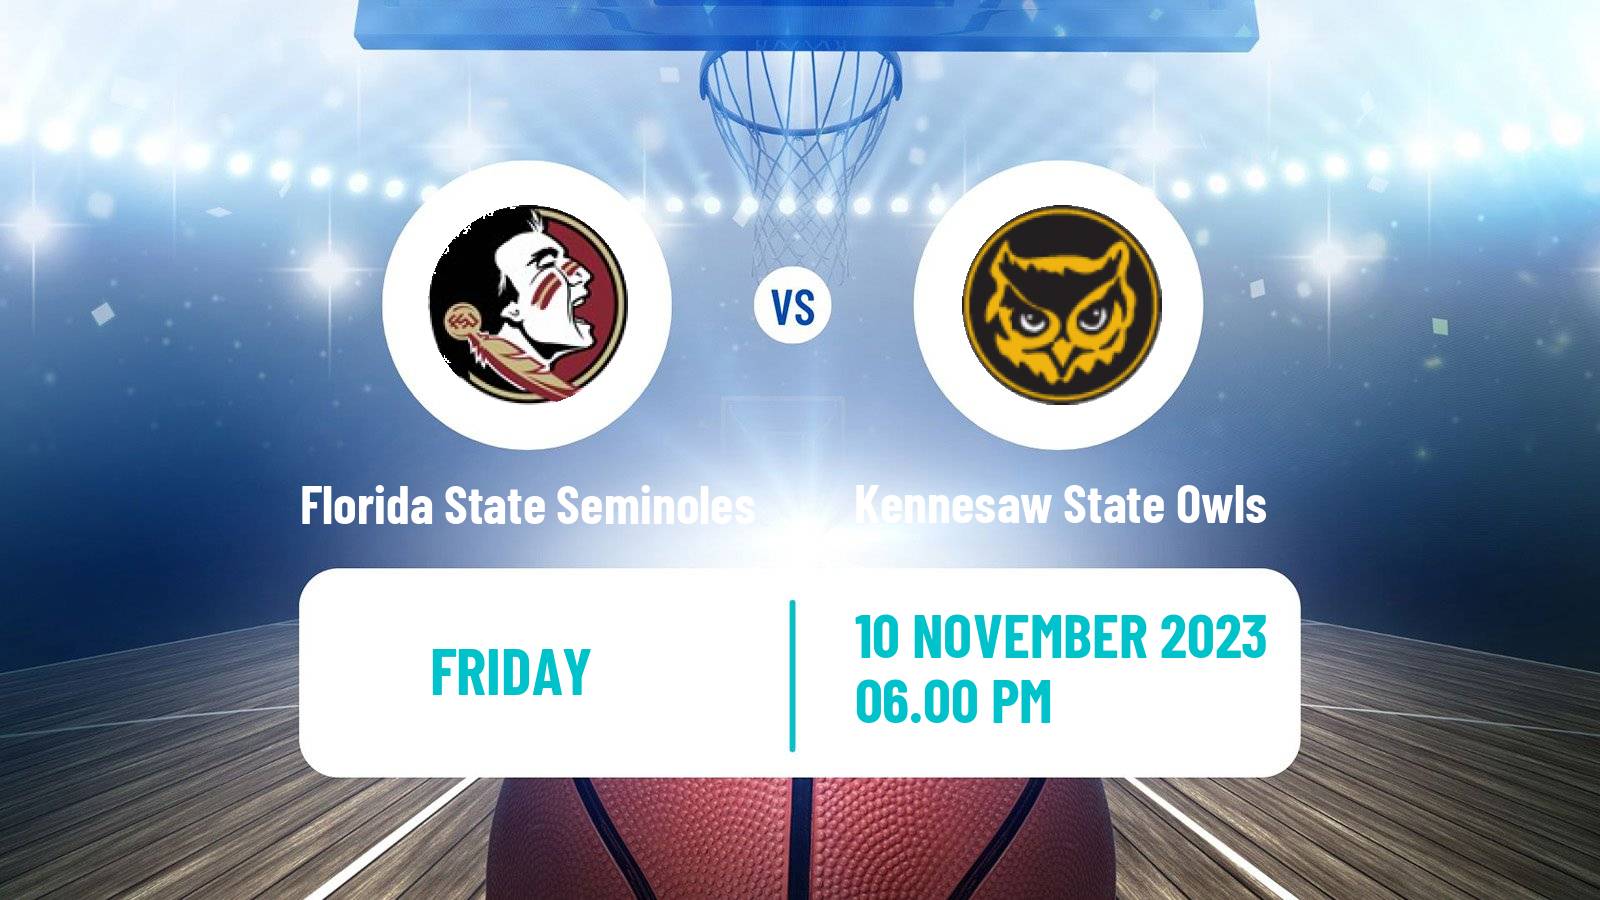 Basketball NCAA College Basketball Florida State Seminoles - Kennesaw State Owls